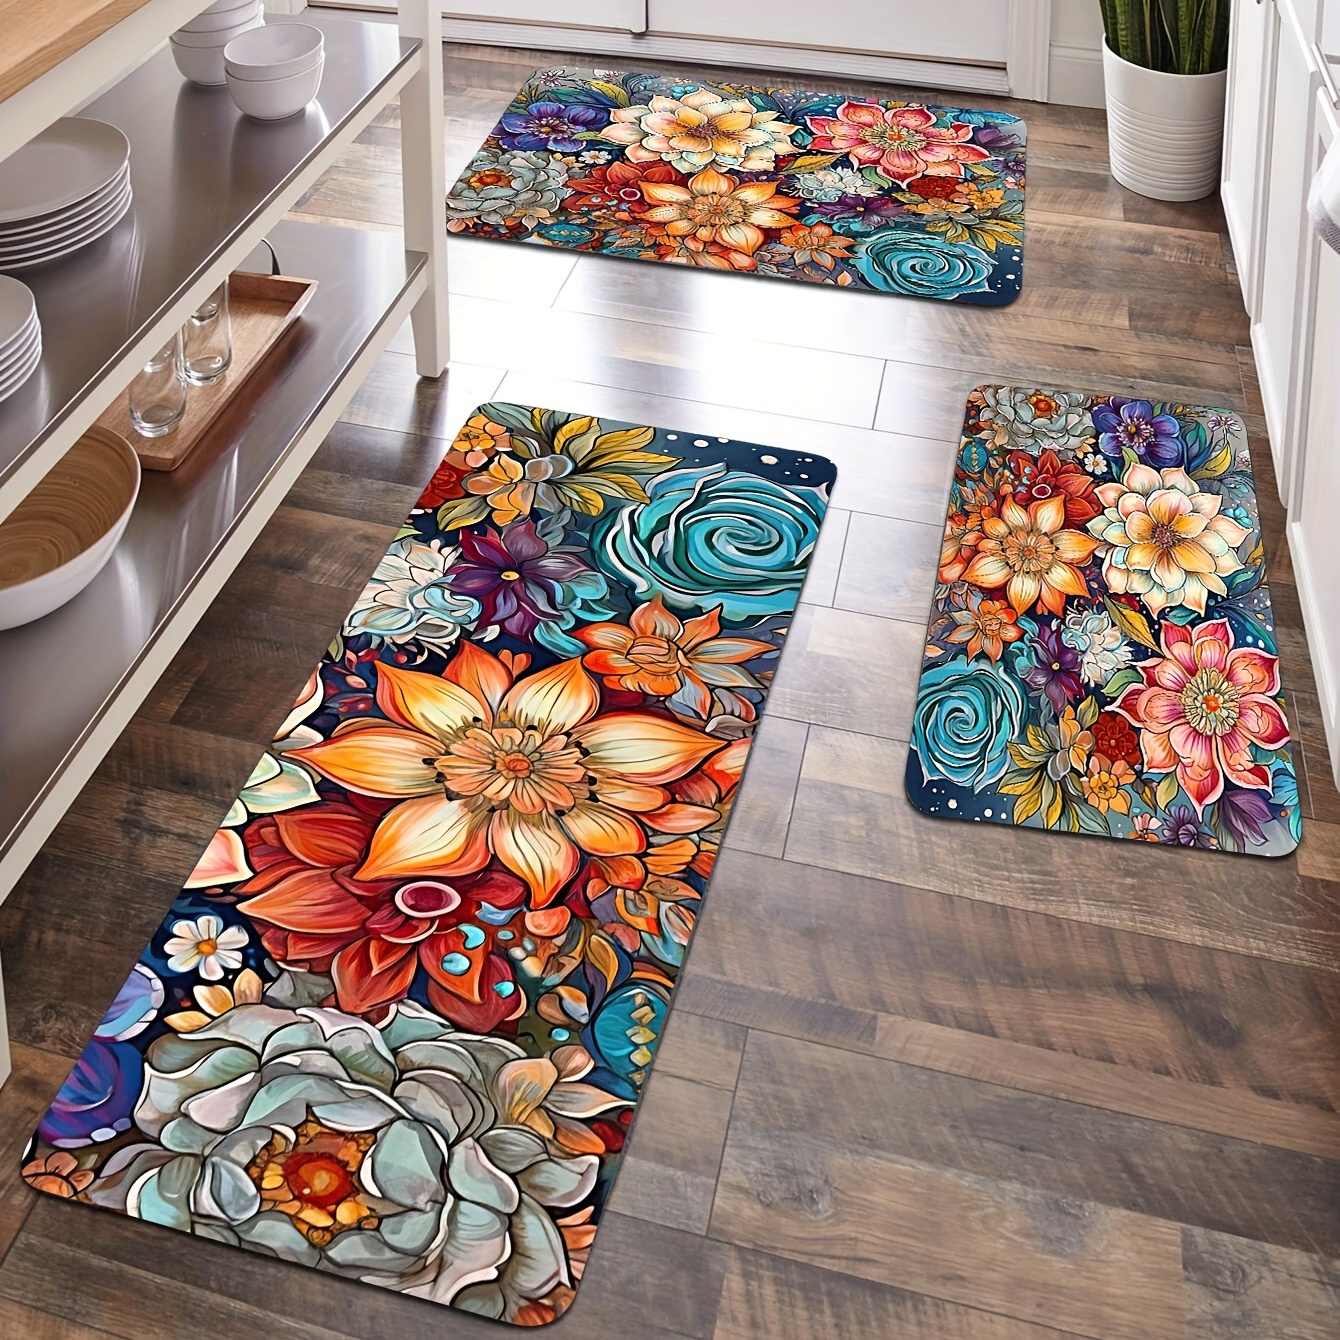 Quality Laundry Kitchen Absorbent Mats Suppliers, House Floor Mats  Manufacturers Wholesale